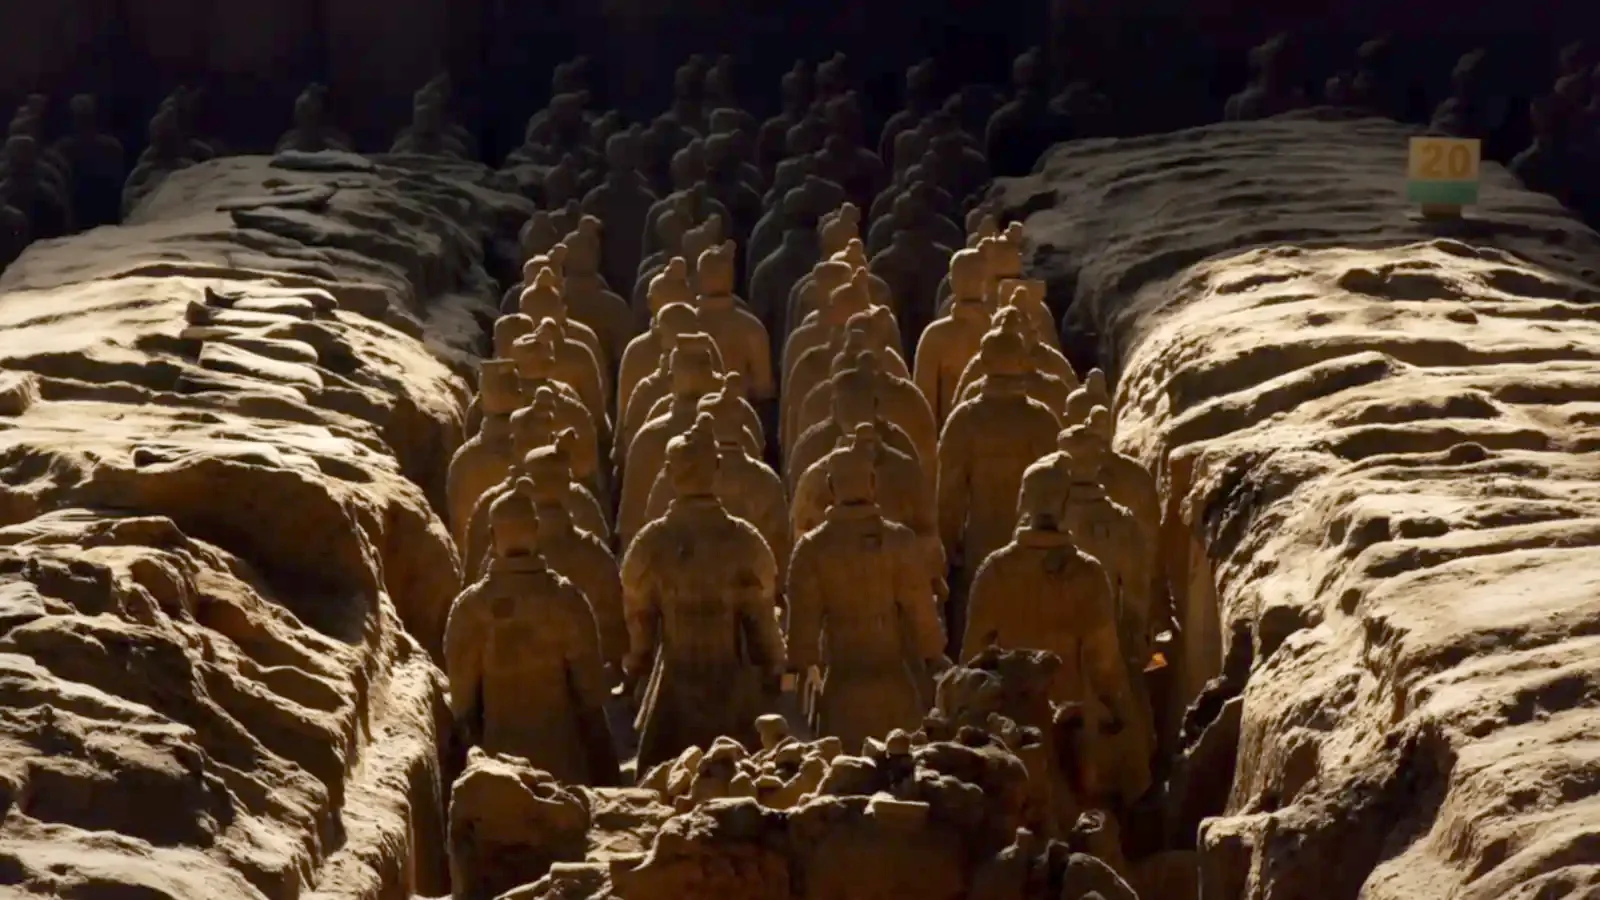 The Greatest Tomb on Earth: Secrets of Ancient China